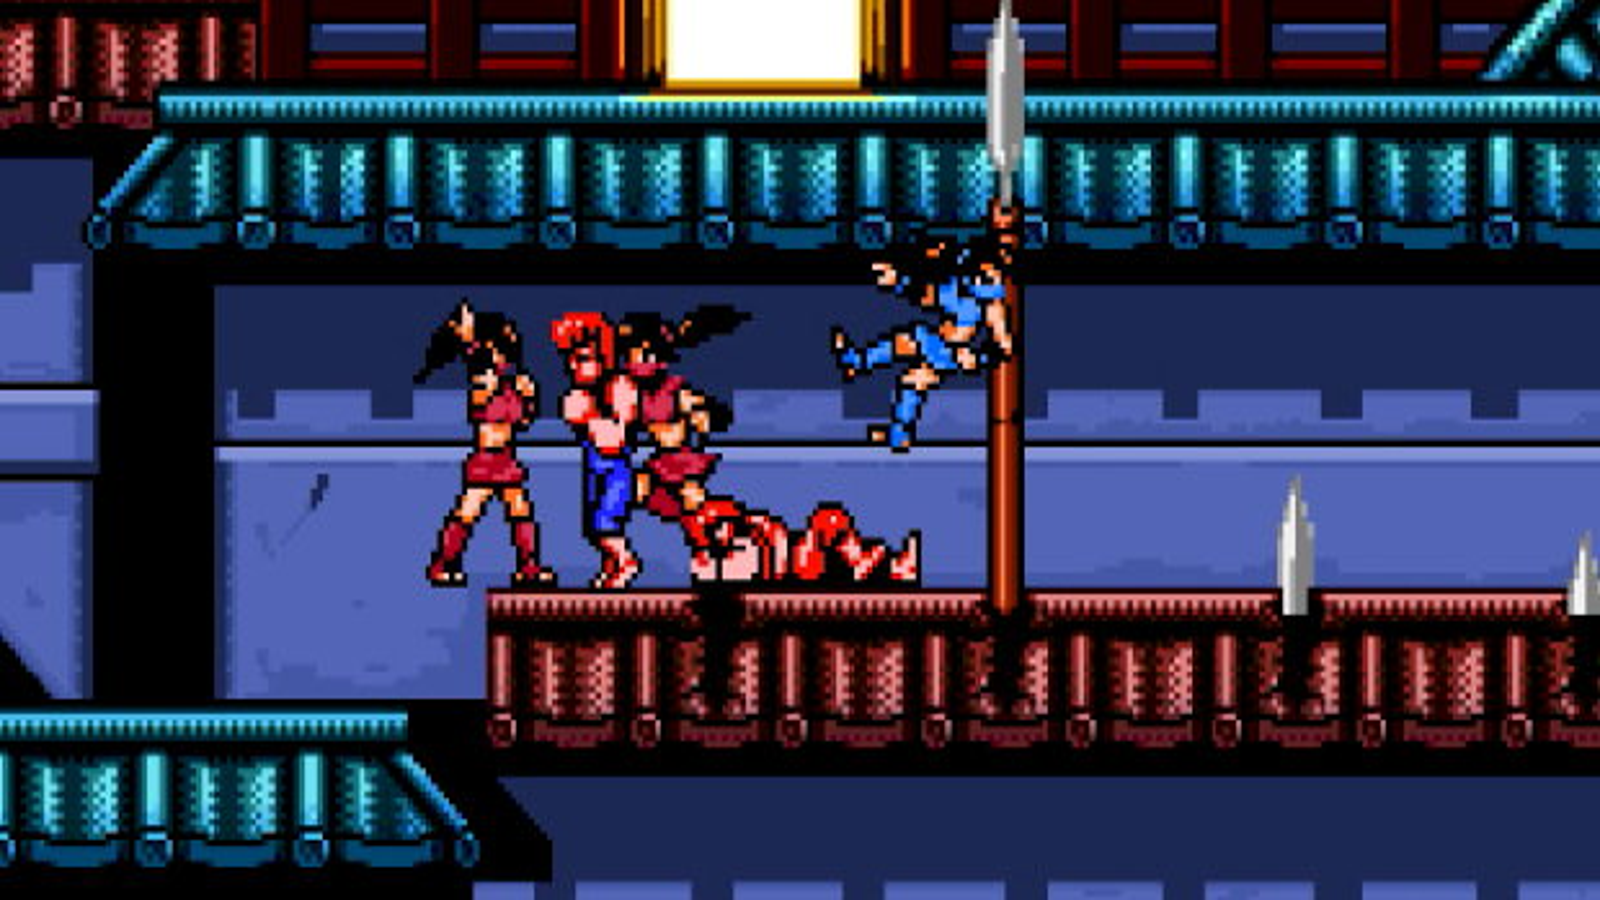 Arc System Works Announces Double Dragon 4 for PS4, PC